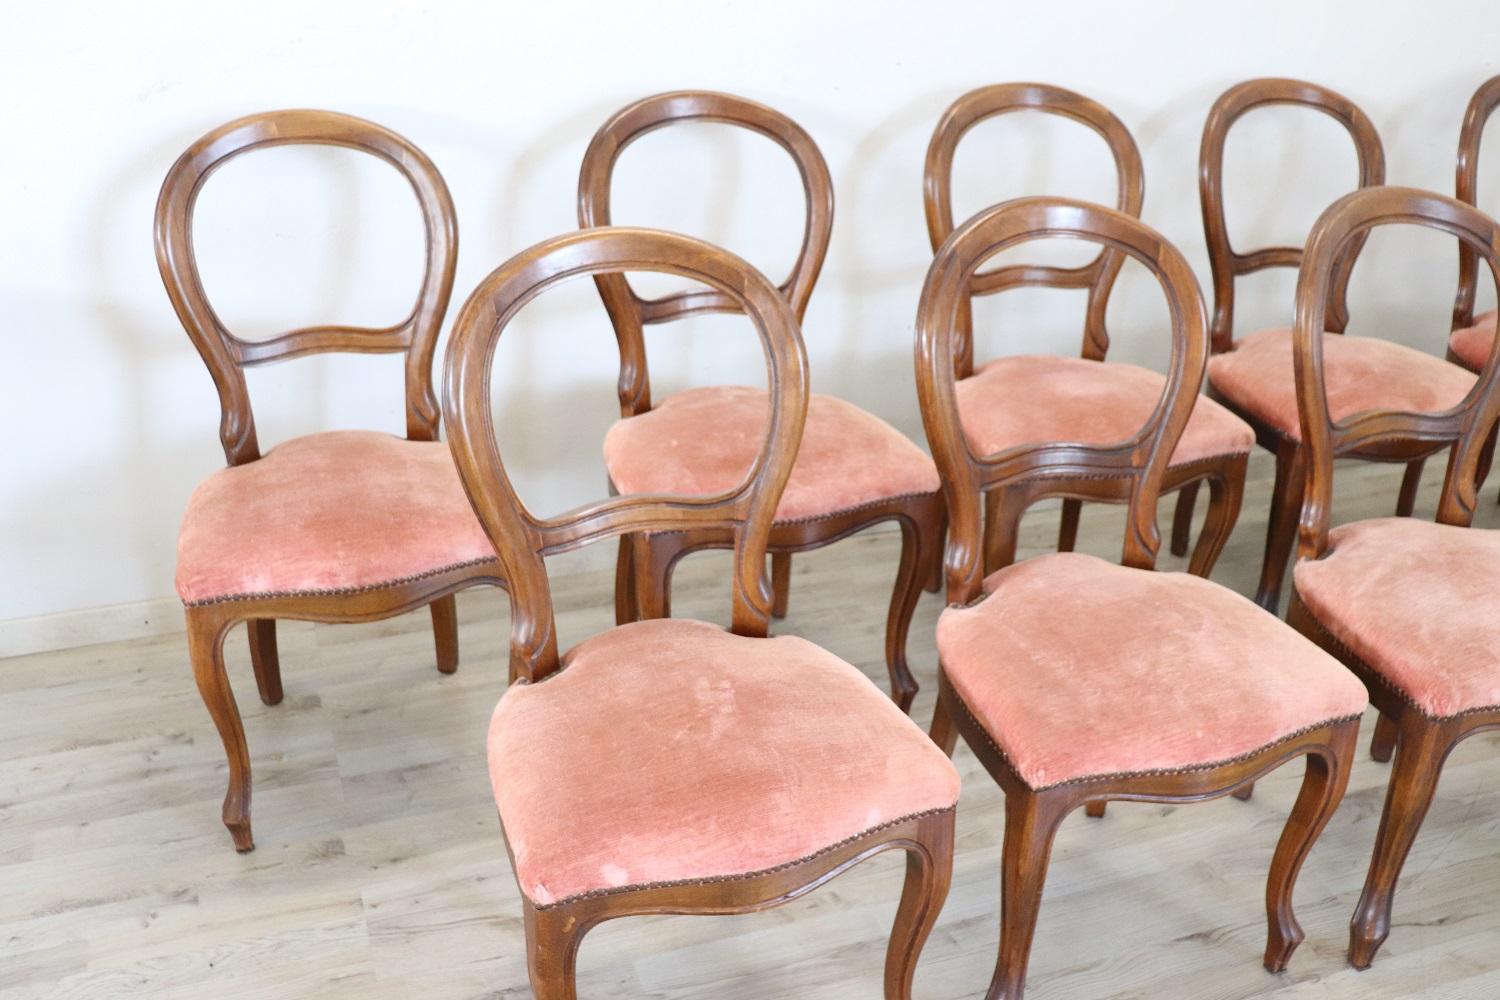 Early 20th Century dining room set of ten chairs in solid beech wood. The chairs are very elegant with very slender and solid moving legs. The seat is wide and comfortable in velvet. The chairs are in wood and padding perfect condition, small signs